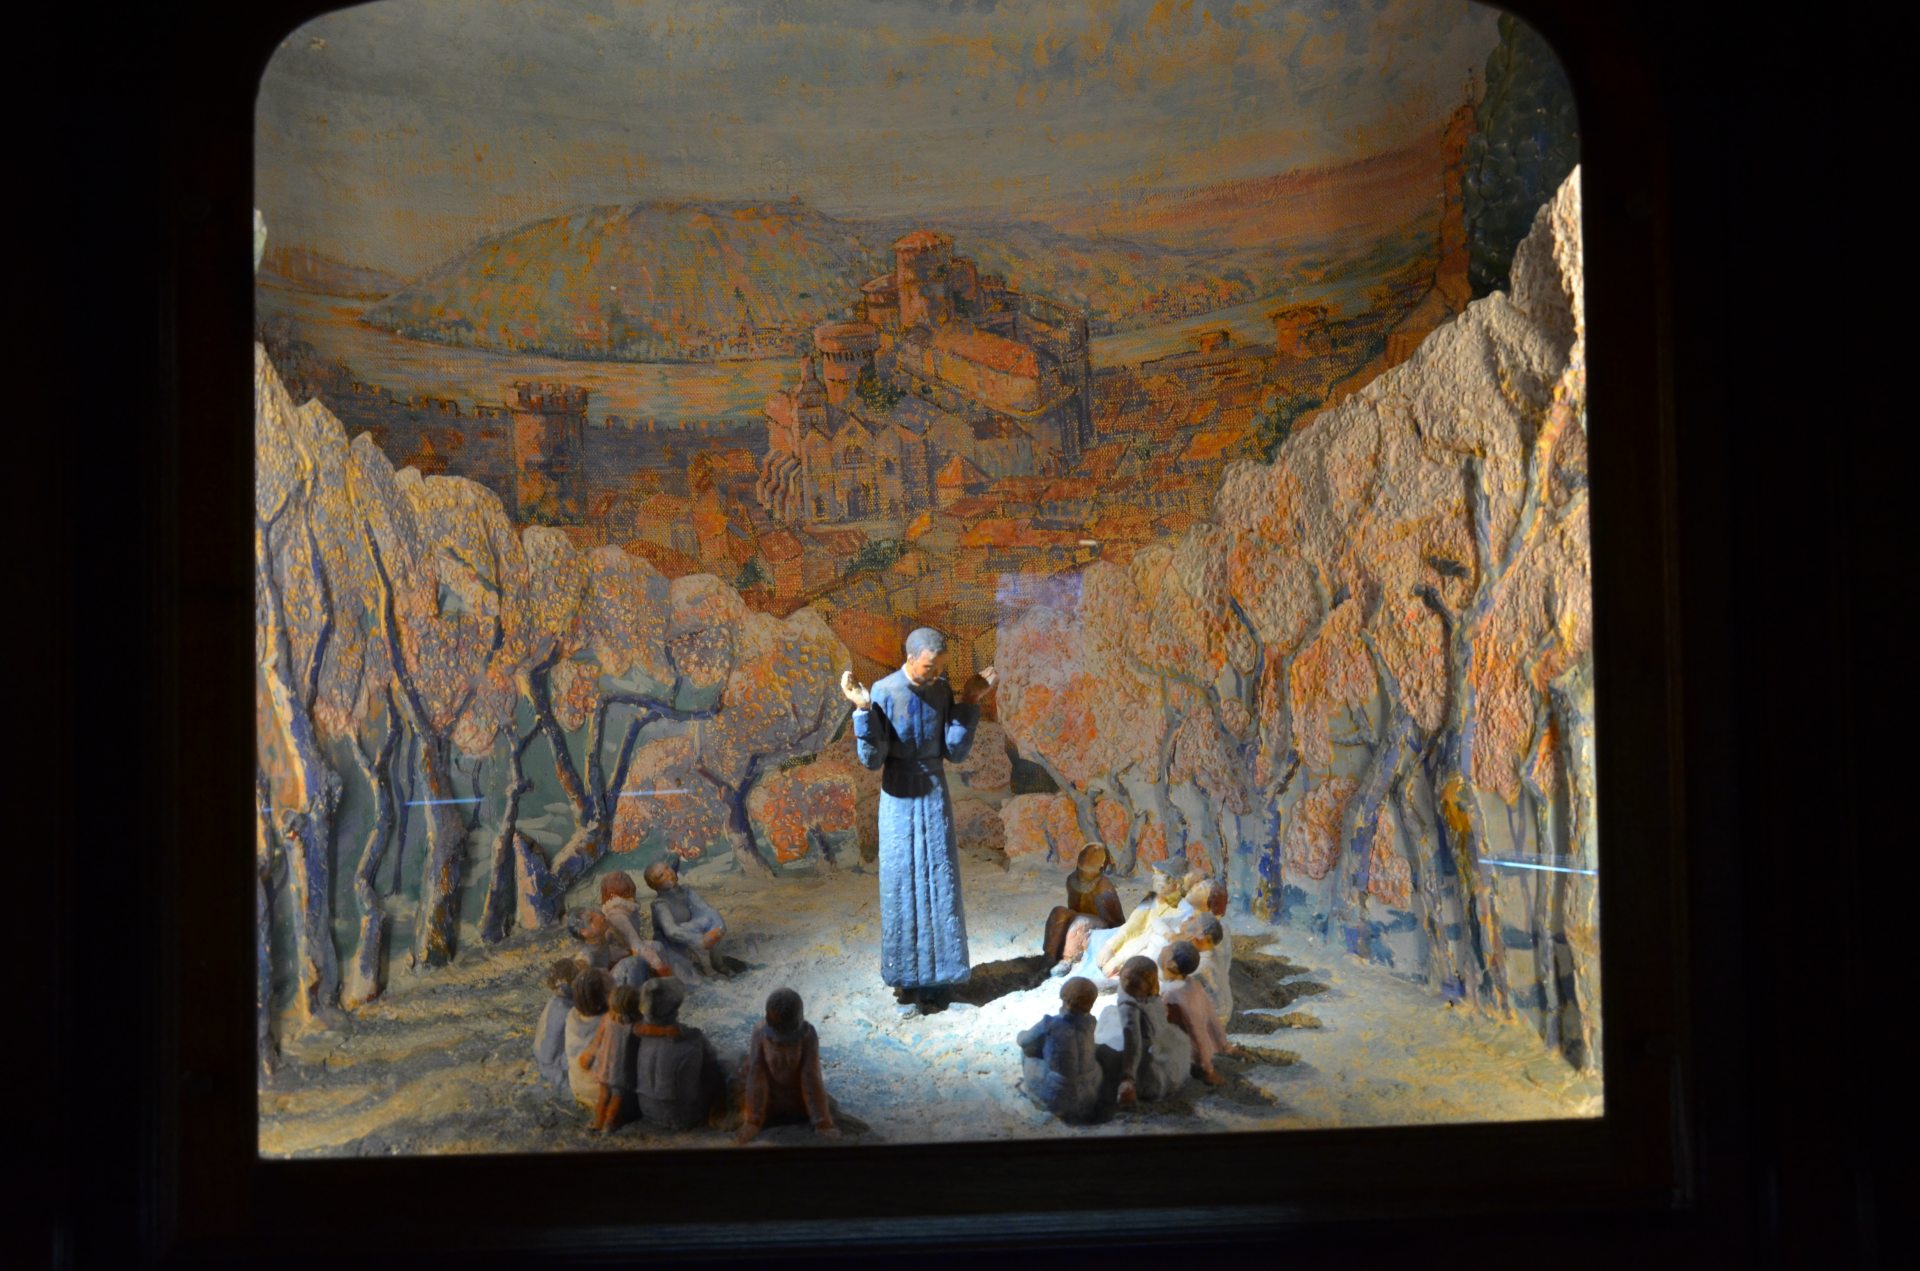 the nativity scene exhibition and the santons of the Saint Regis diorama in Lalouvesc in Northern Ardèche